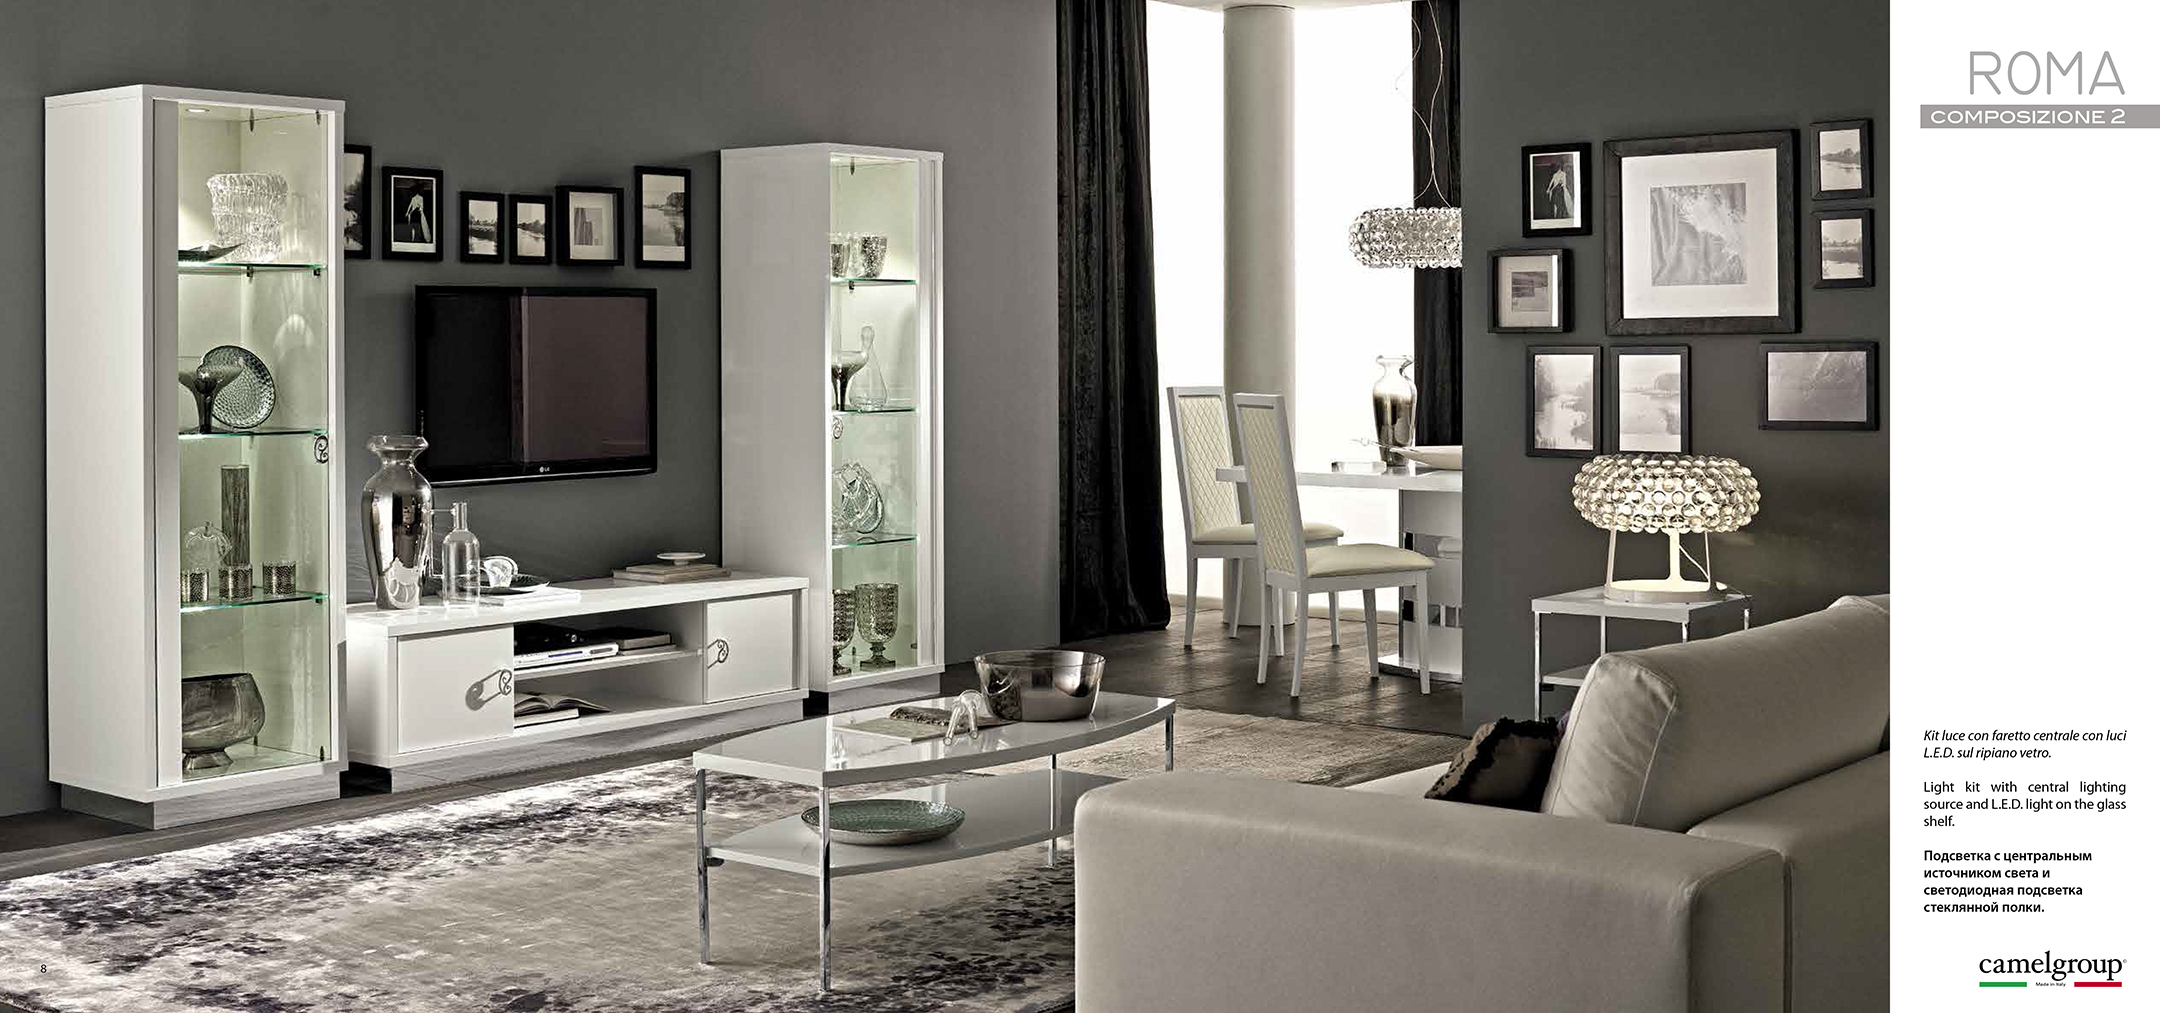 Living Room Furniture Coffee and End Tables Roma White Additional Items